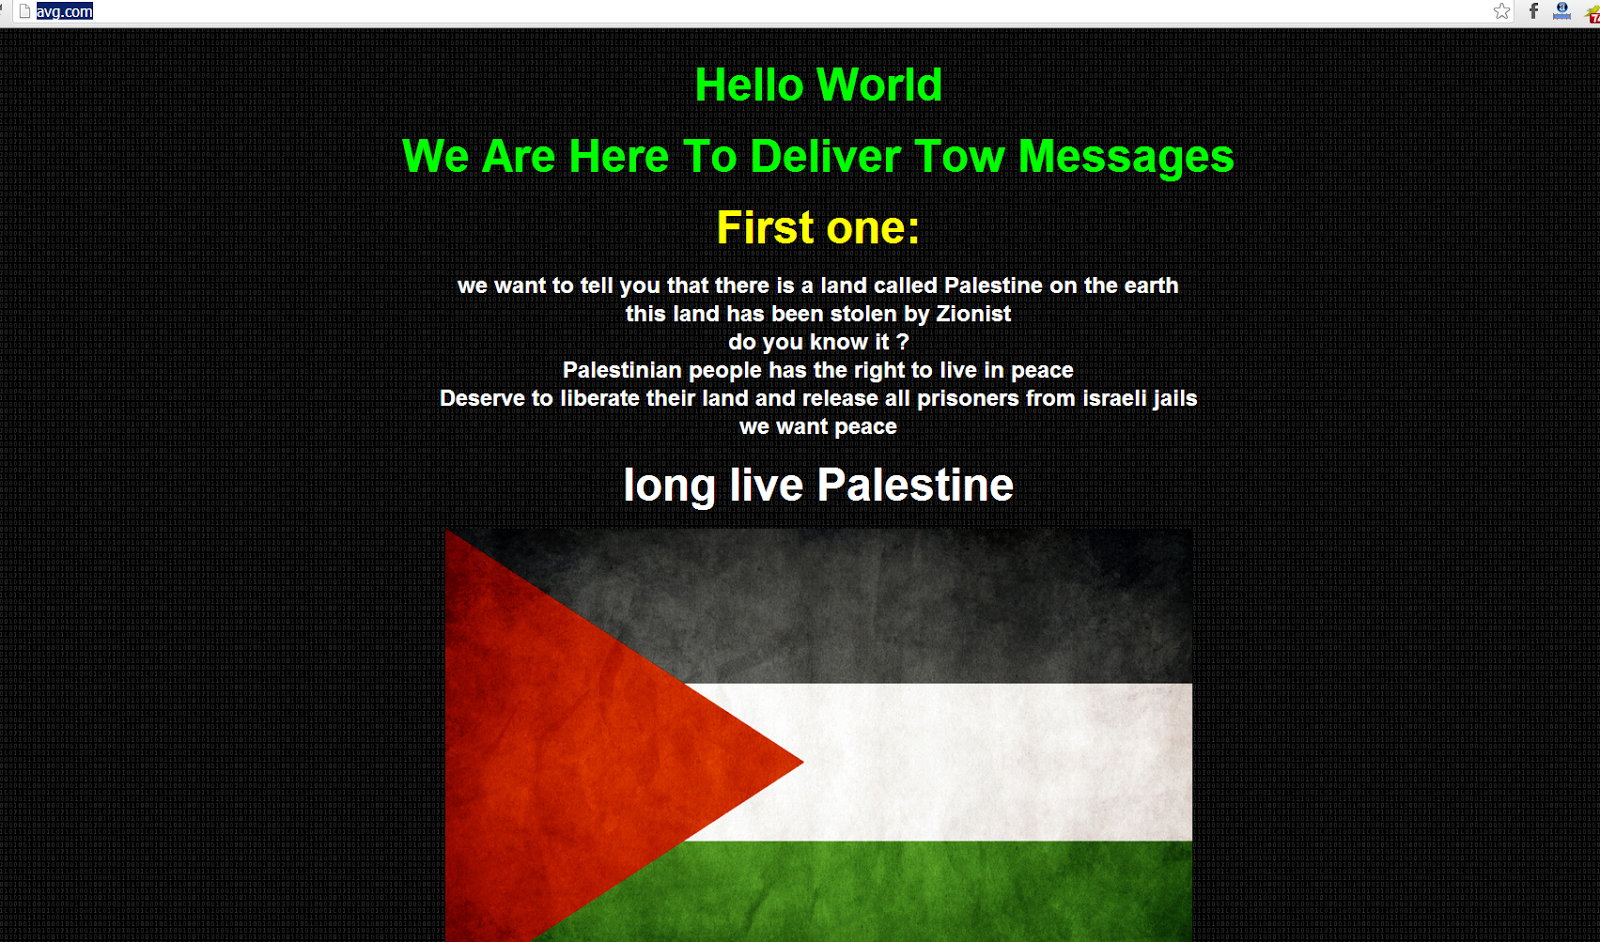 Whatsapp and AVG Antivirus Firm Websites defaced by Palestinian Hackers